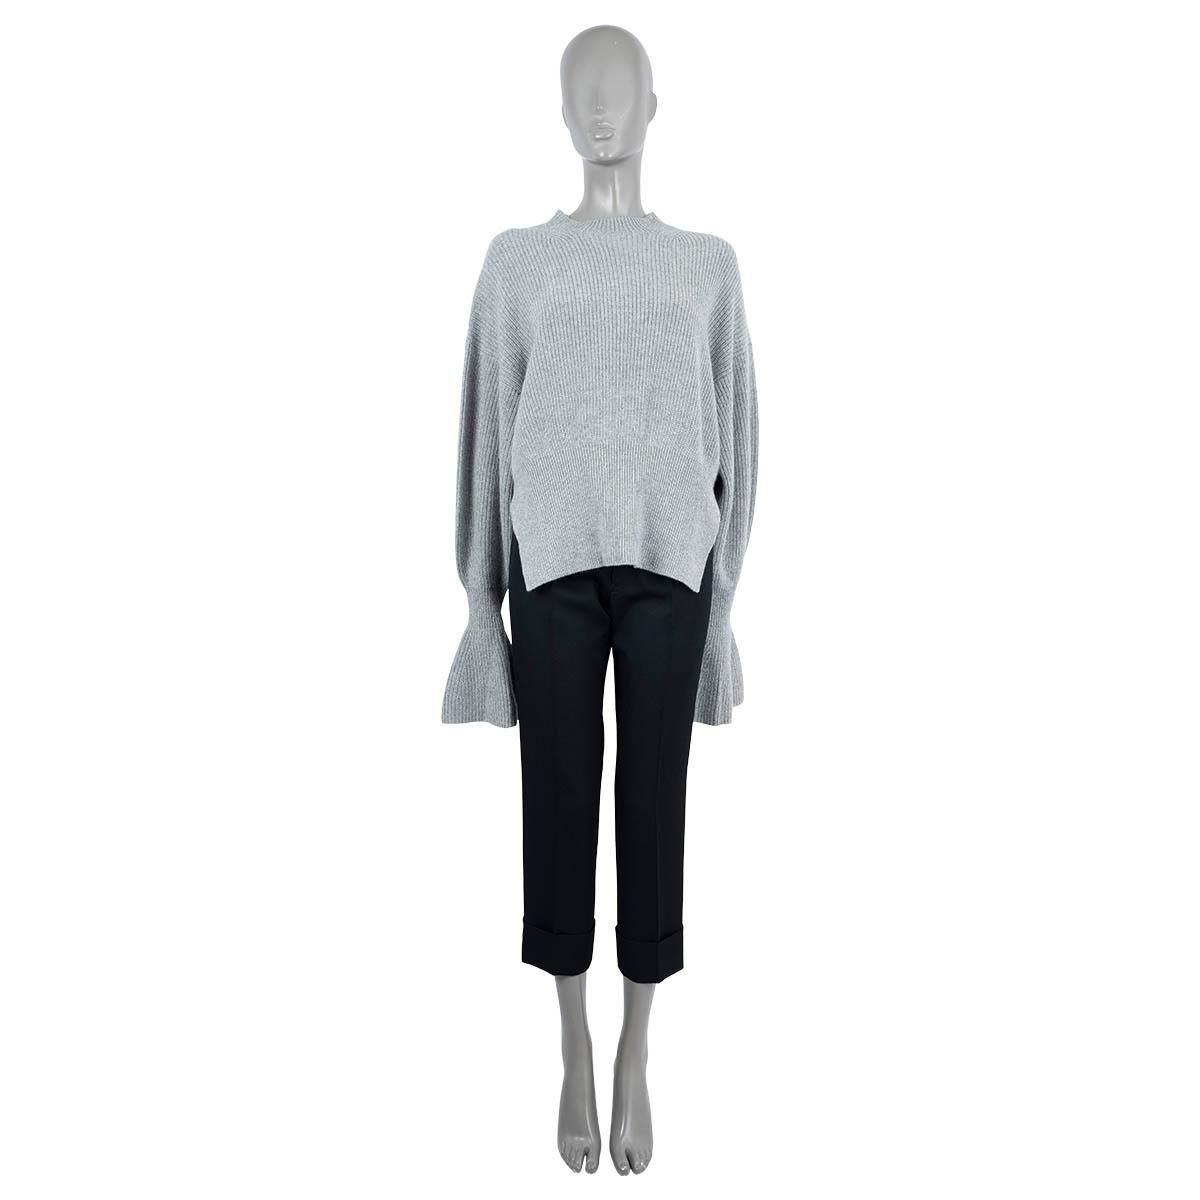 100% authentic Alexander Wang rib-knit sweater in heather grey wool (61%), viscose (31%) and cashmere (8%). Featuring a mock neck, split hem and gathered and fluted long sleeves. Has been worn and is in excellent condition.

Measurements
Tag